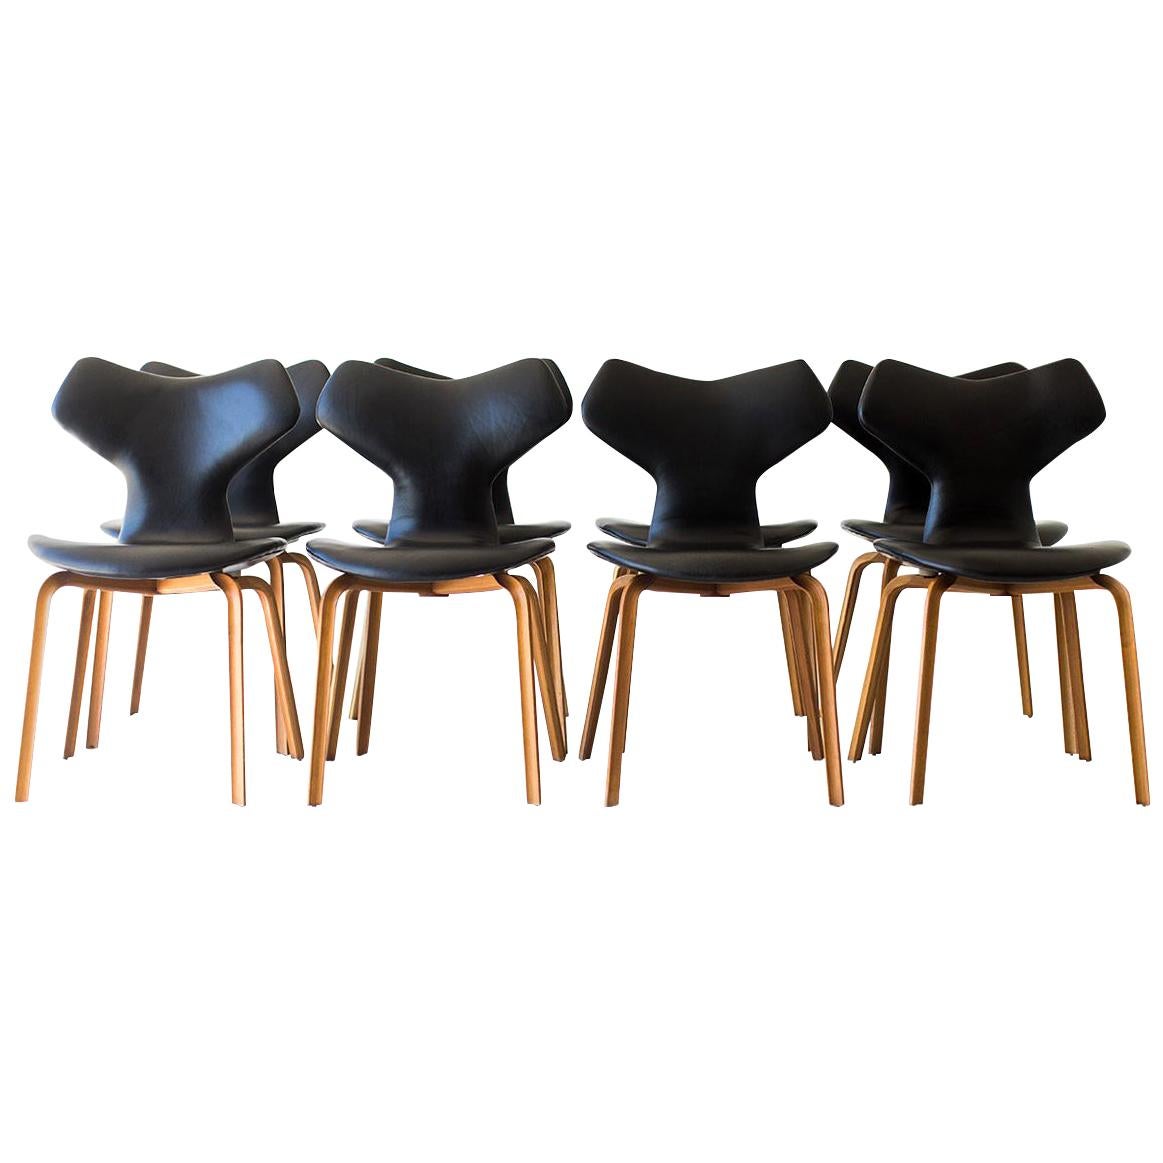 Set of 8 Arne Jacobsen Leather Grand Prix Dining Chairs for Fritz Hansen